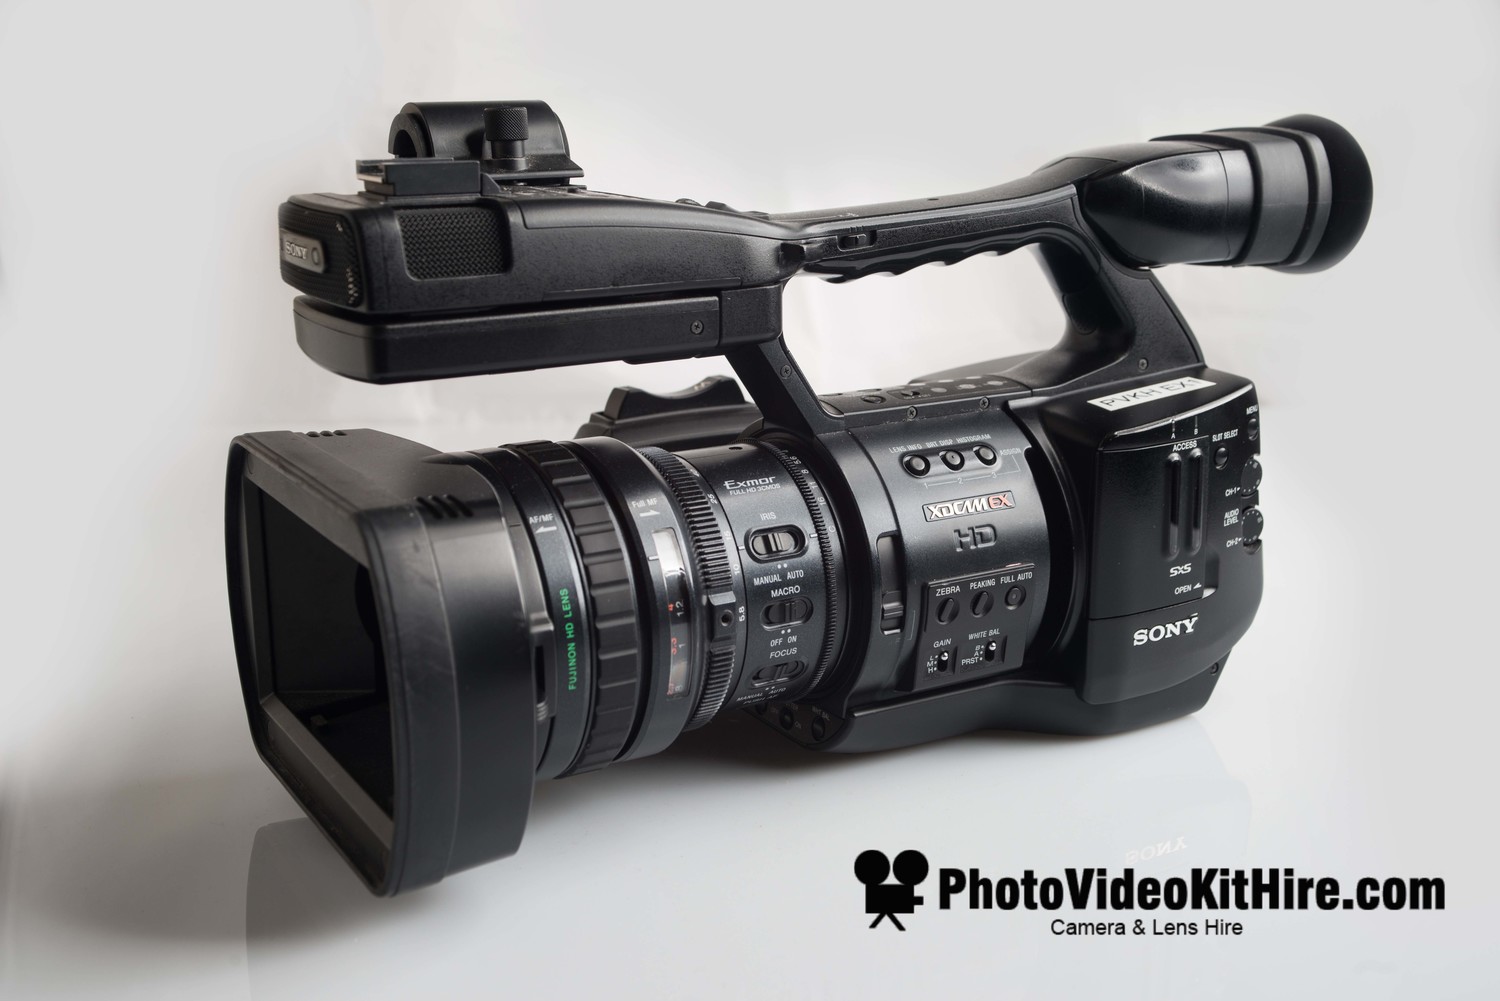 Sony PMW-EX1 Camera Hire — PhotoVideoKitHire.com | Camera & Lens Hire  Covering The Midlands With Local Pickup From Birmingham